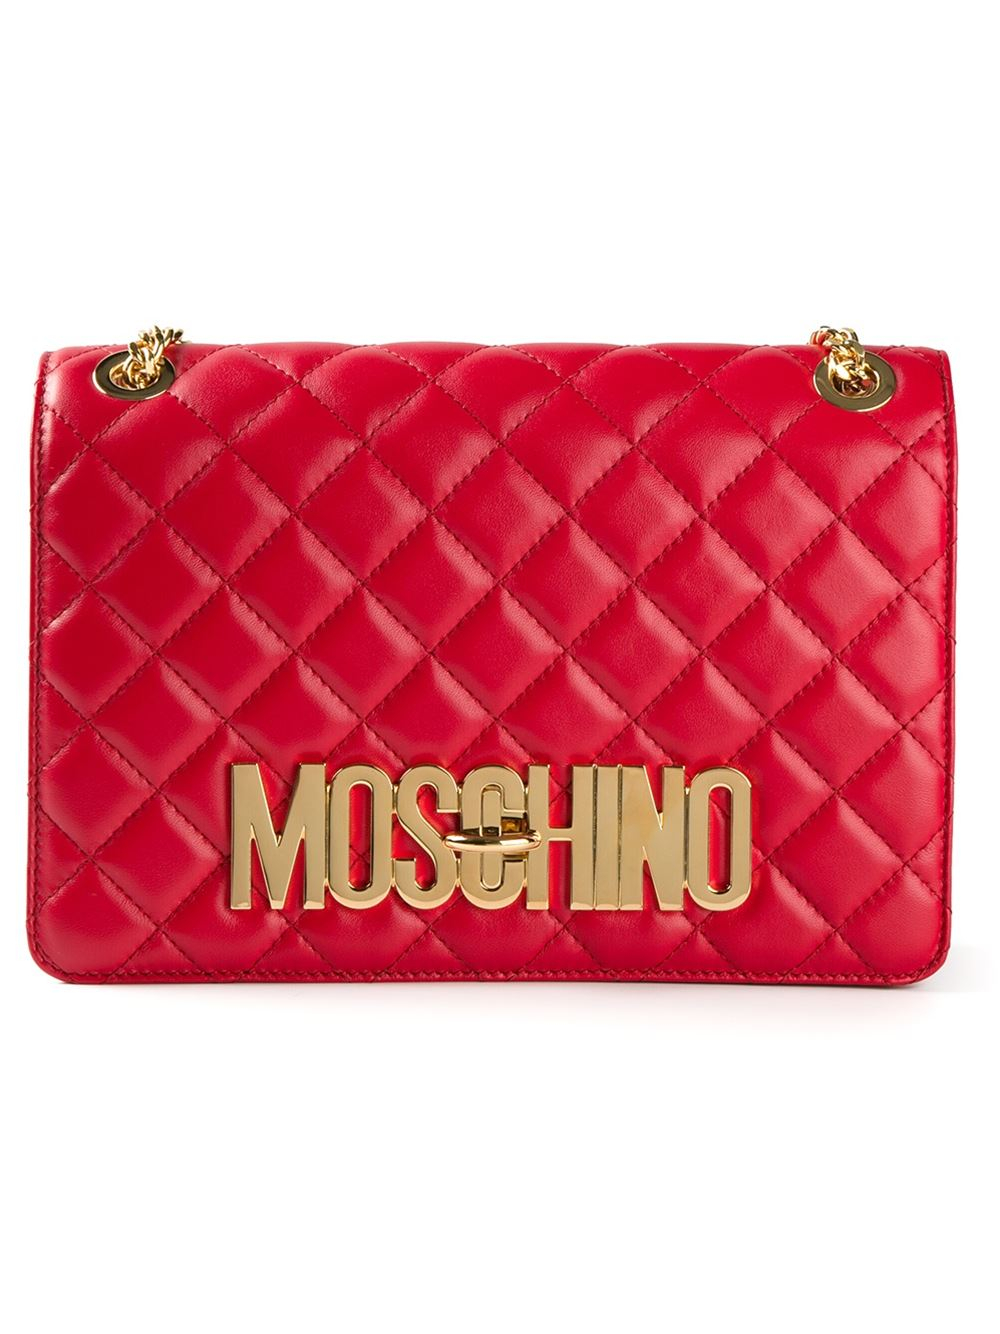 Moschino Shoulder Bag in Red | Lyst